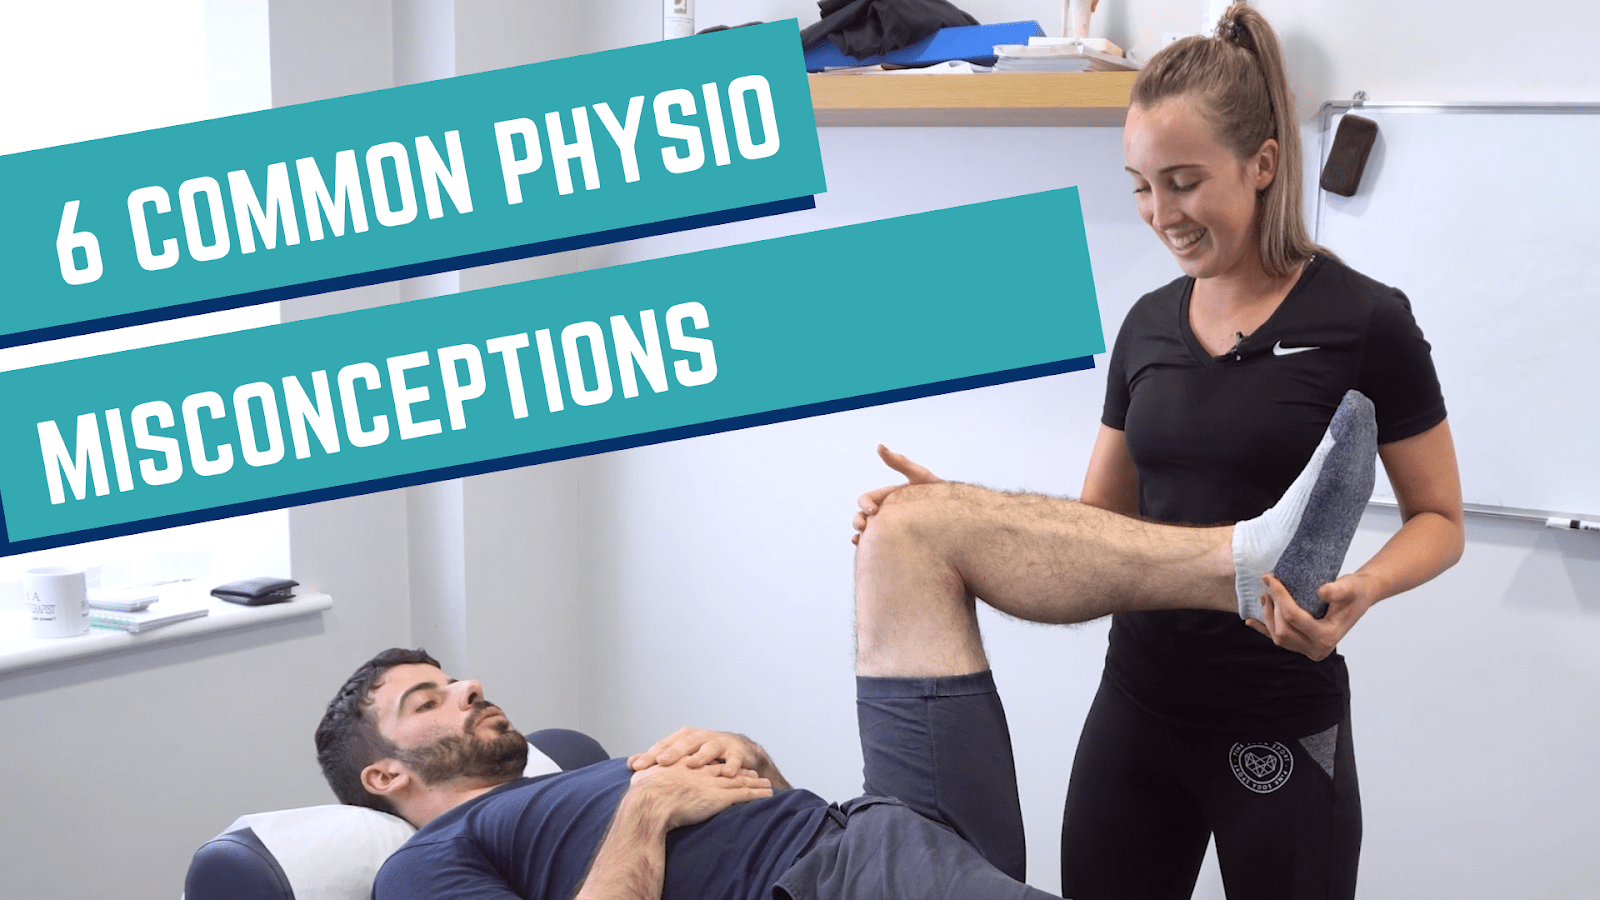 6 Common Misconceptions You Probably Have About Physiotherapy